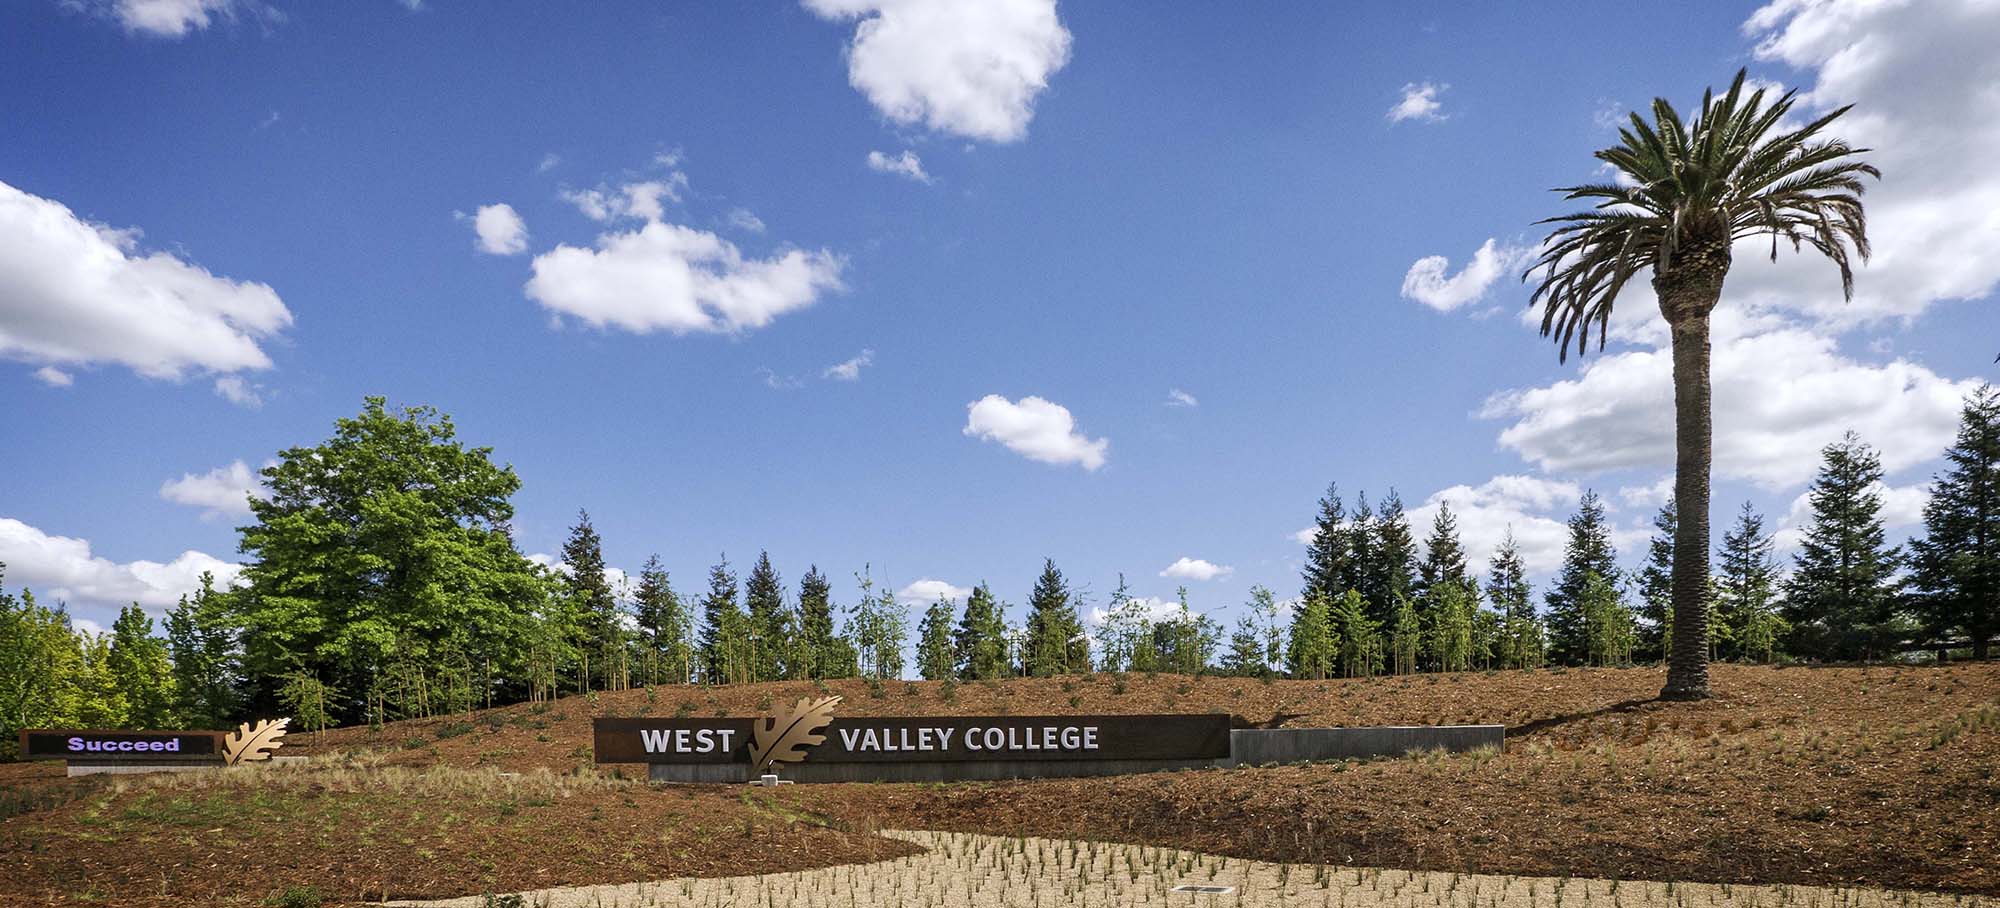 West Valley College, Entry Project, TLCD Architecture, Oak Nursery, Historic Palm, Signage, Drought Tolerant